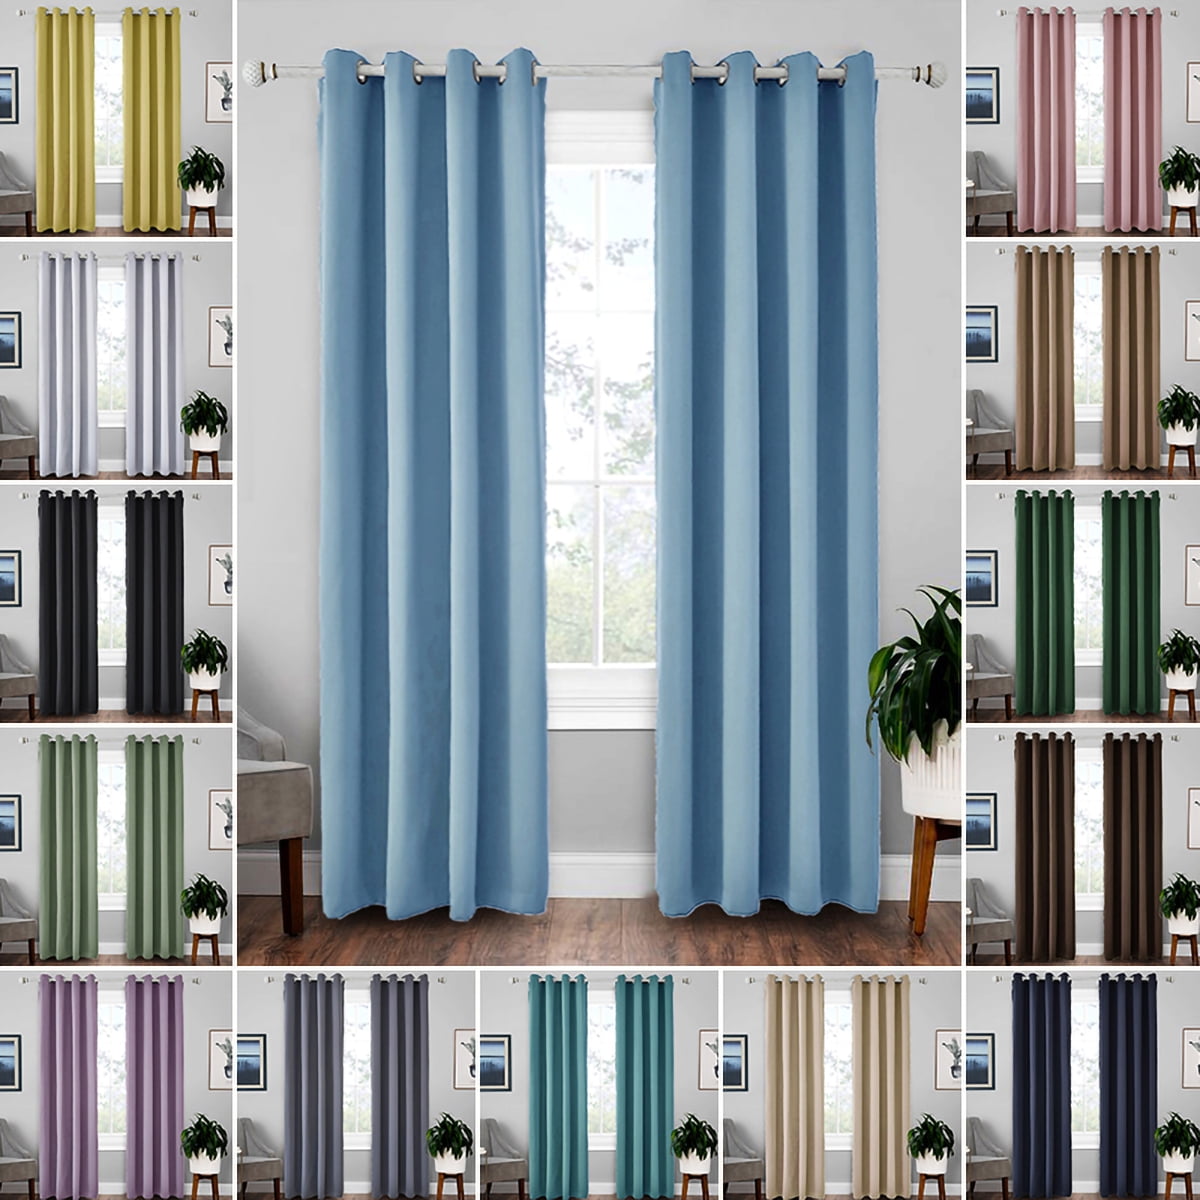 Thermal Blackout Curtains Eyelet Top Ready Made Drapes 2 Panels Tie Backs 